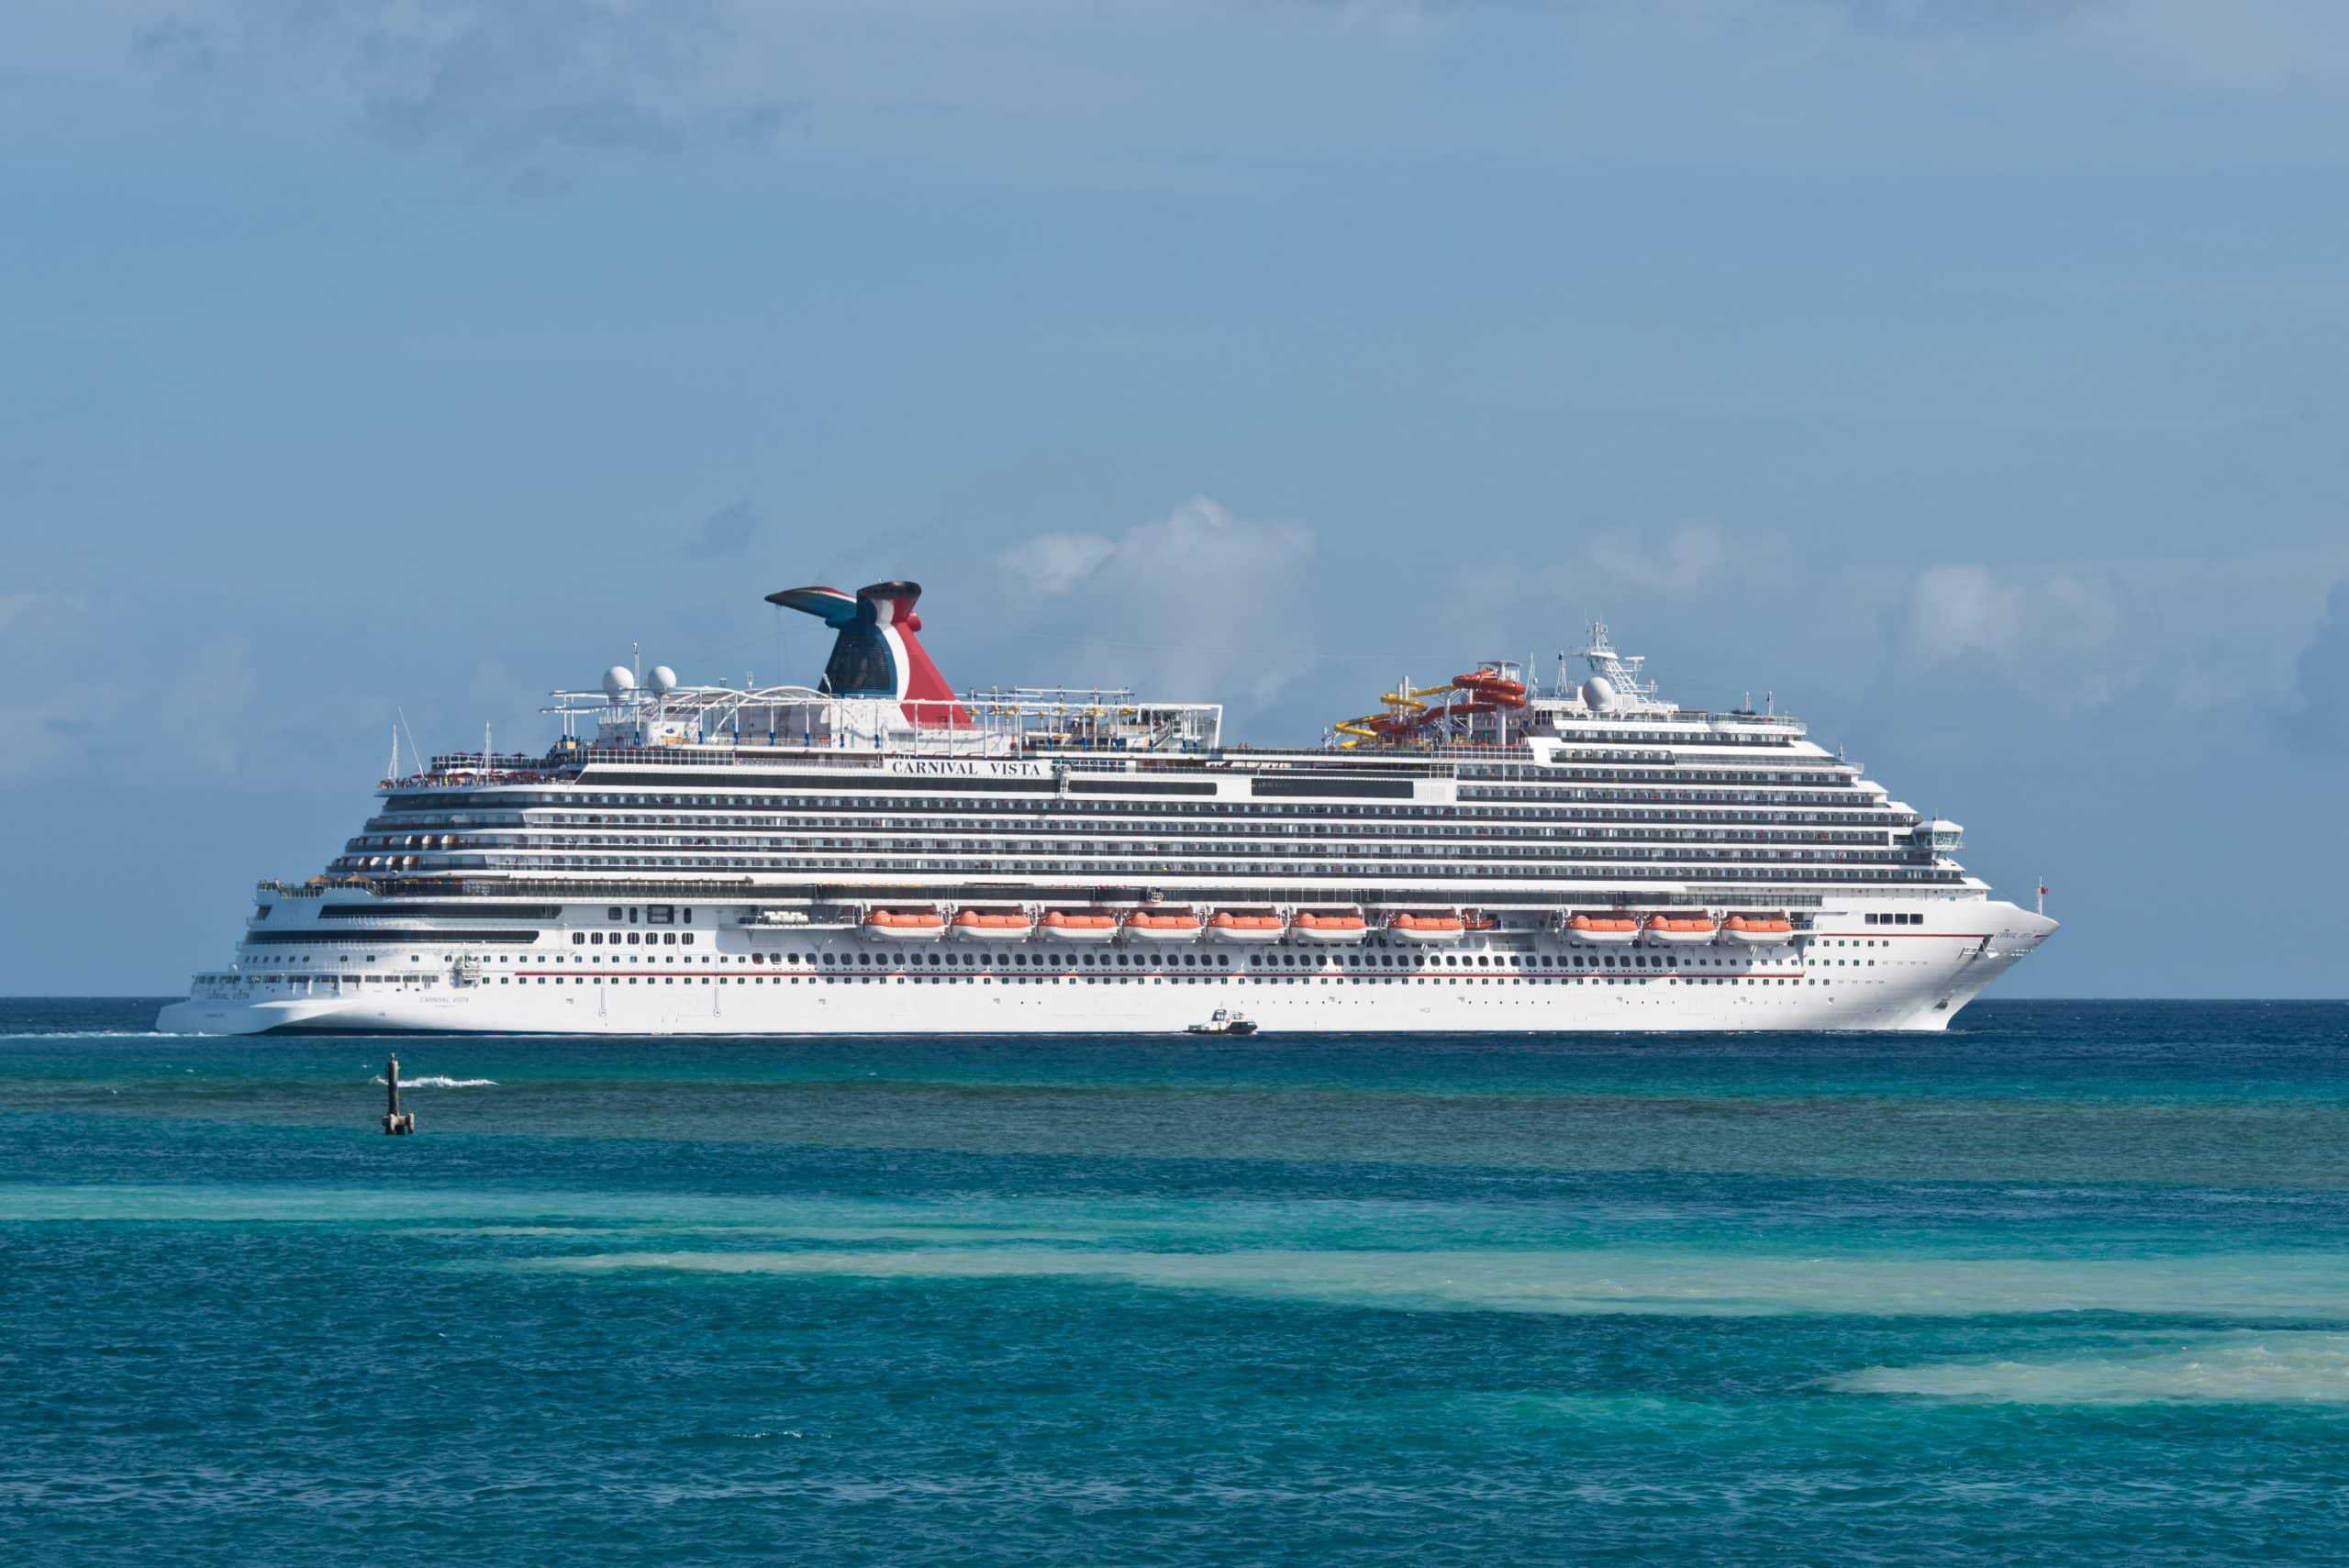 <p>While laid-back and full of entertaining amenities, the Carnival Vista maintains a blase 3.6 out of 5 on <a href="https://www.cruisecritic.com/cruise/carnival/carnival-vista/reviews">CruiseCritic</a>, according to actual passenger reviews. Capable of accommodating nearly 3,000 passengers, the Vista is designed for thrill-seeking groups and those looking for extroverted, social opportunities.</p><p>Remember to scroll up and hit the ‘Follow’ button to keep up with the newest stories from Seattle Travel on your Microsoft Start feed or MSN homepage!</p>